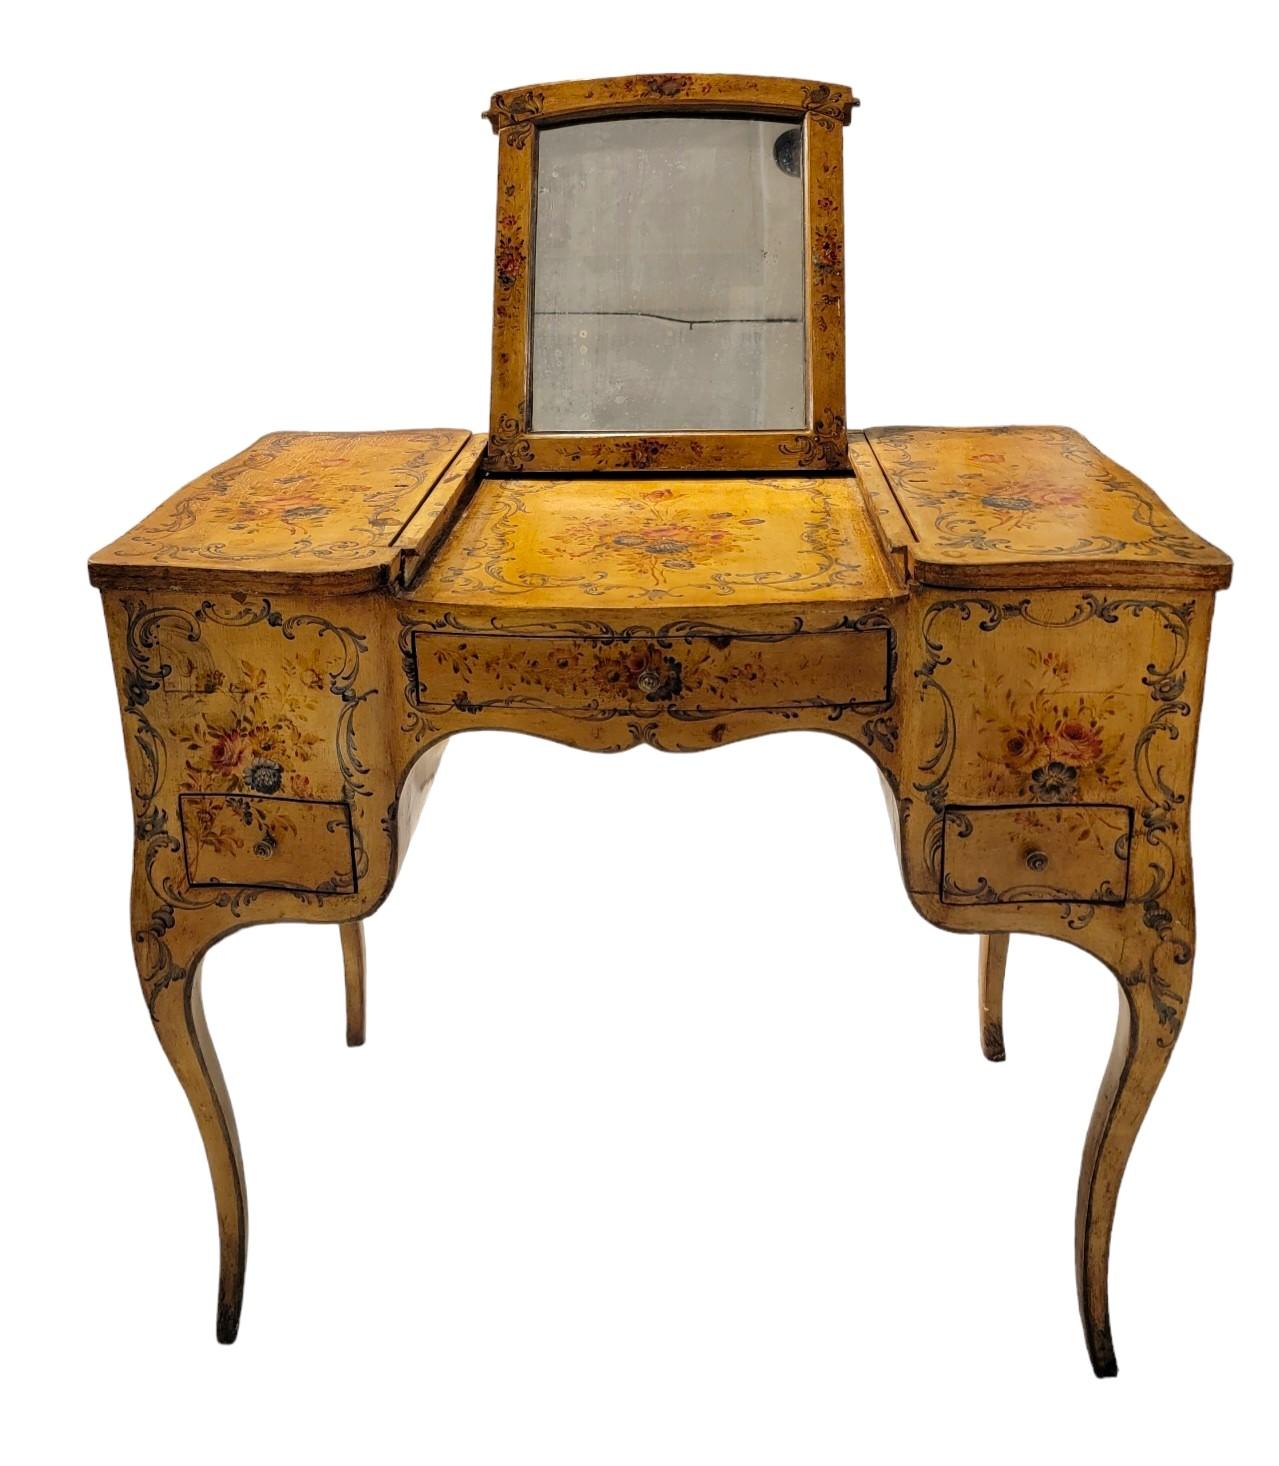 19thc French Hand Painted Desk/Vanity Wth Mirror. This amazing vanity has 3 drawers, 2 side compartments and a flip up mirror. Wonderful Old Floral stencil design. Wear consistent of age and use.  35w x 20.5d x 30h